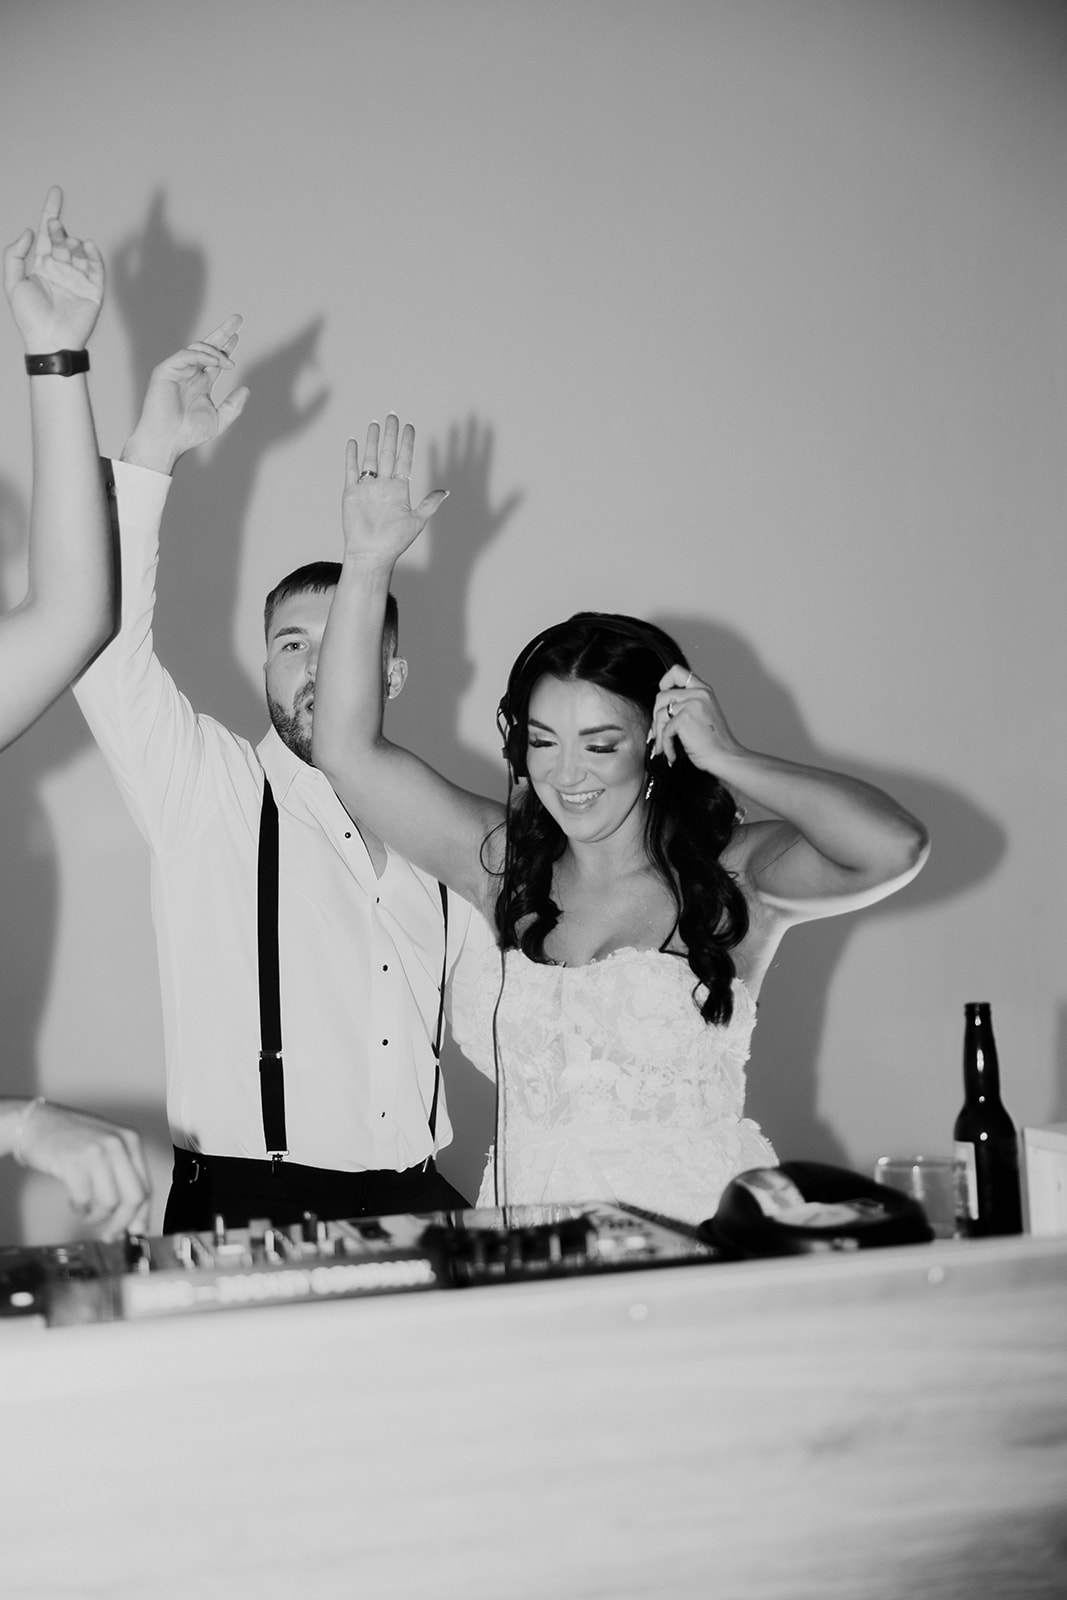 A couple enthusiastically dancing with raised arms at their wedding, captured in black and white.